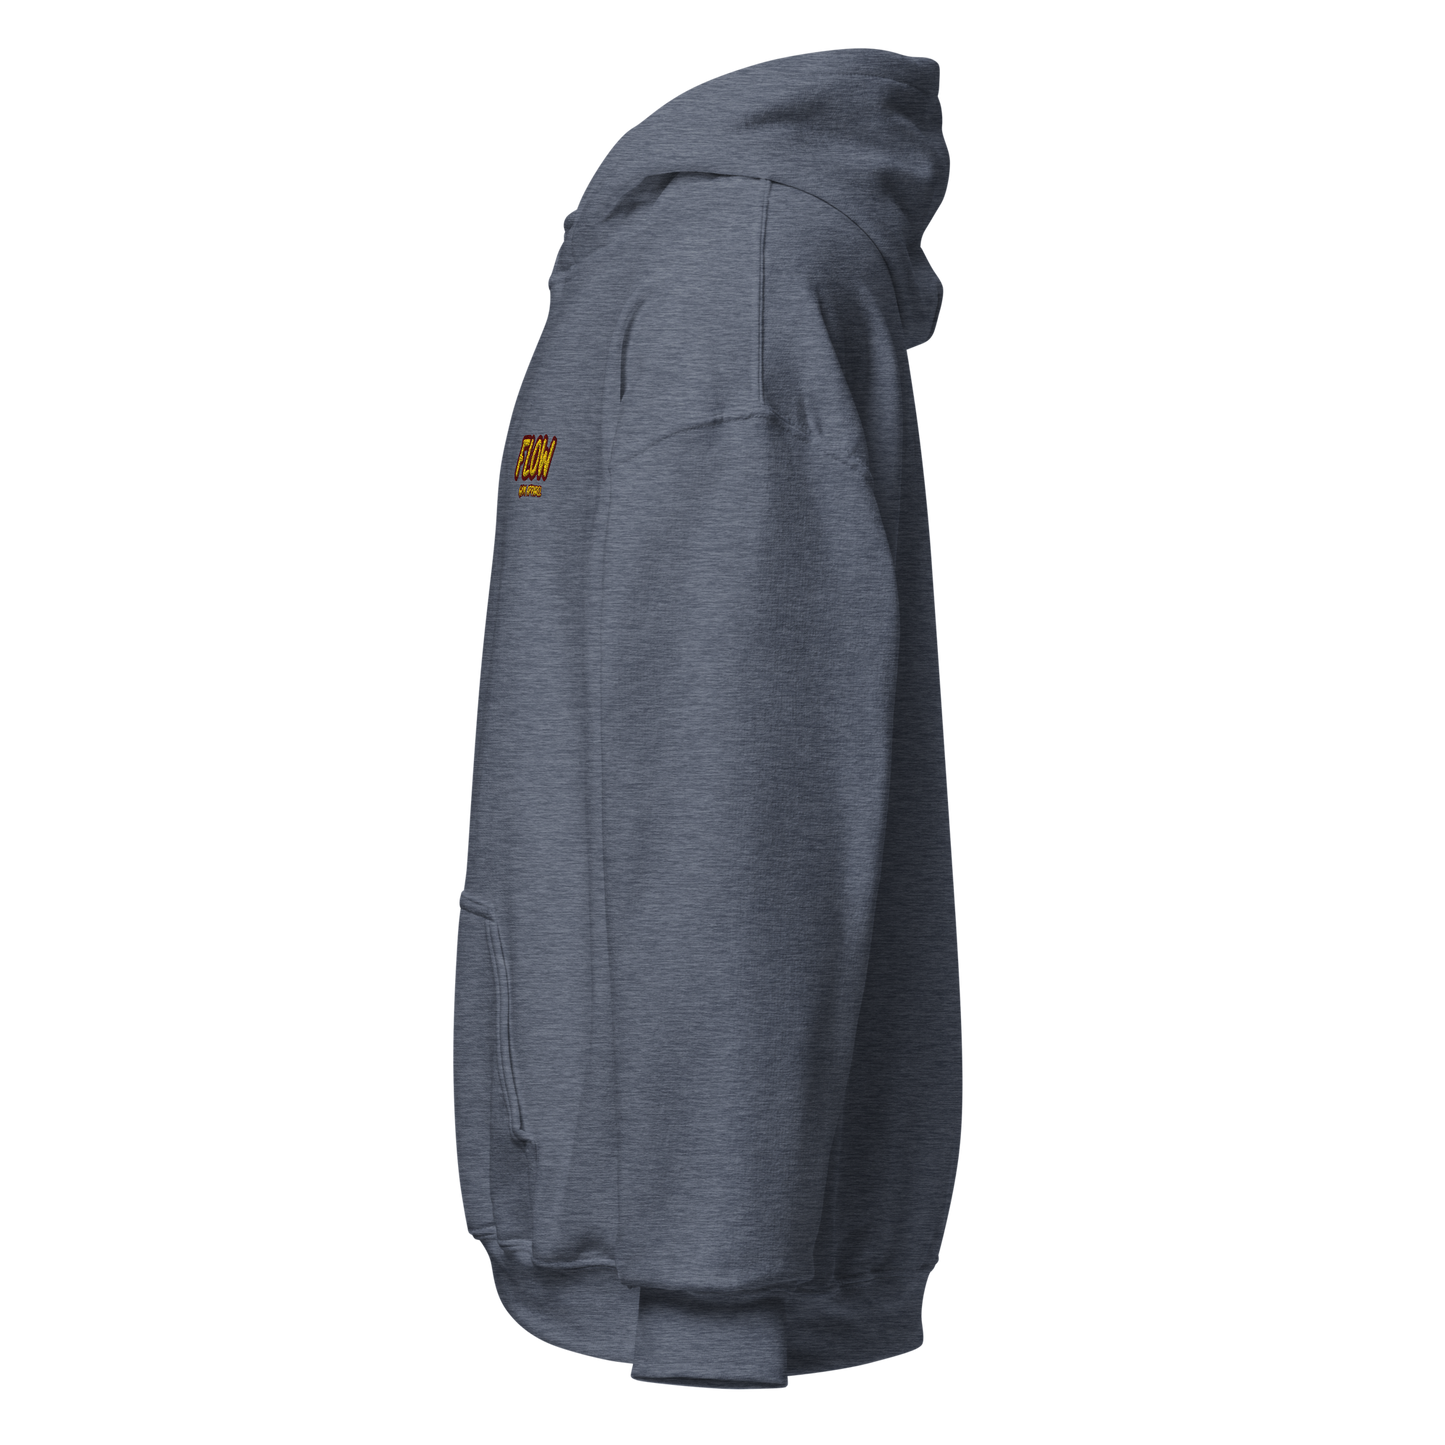 FLOW Hoodie (Embroidered)